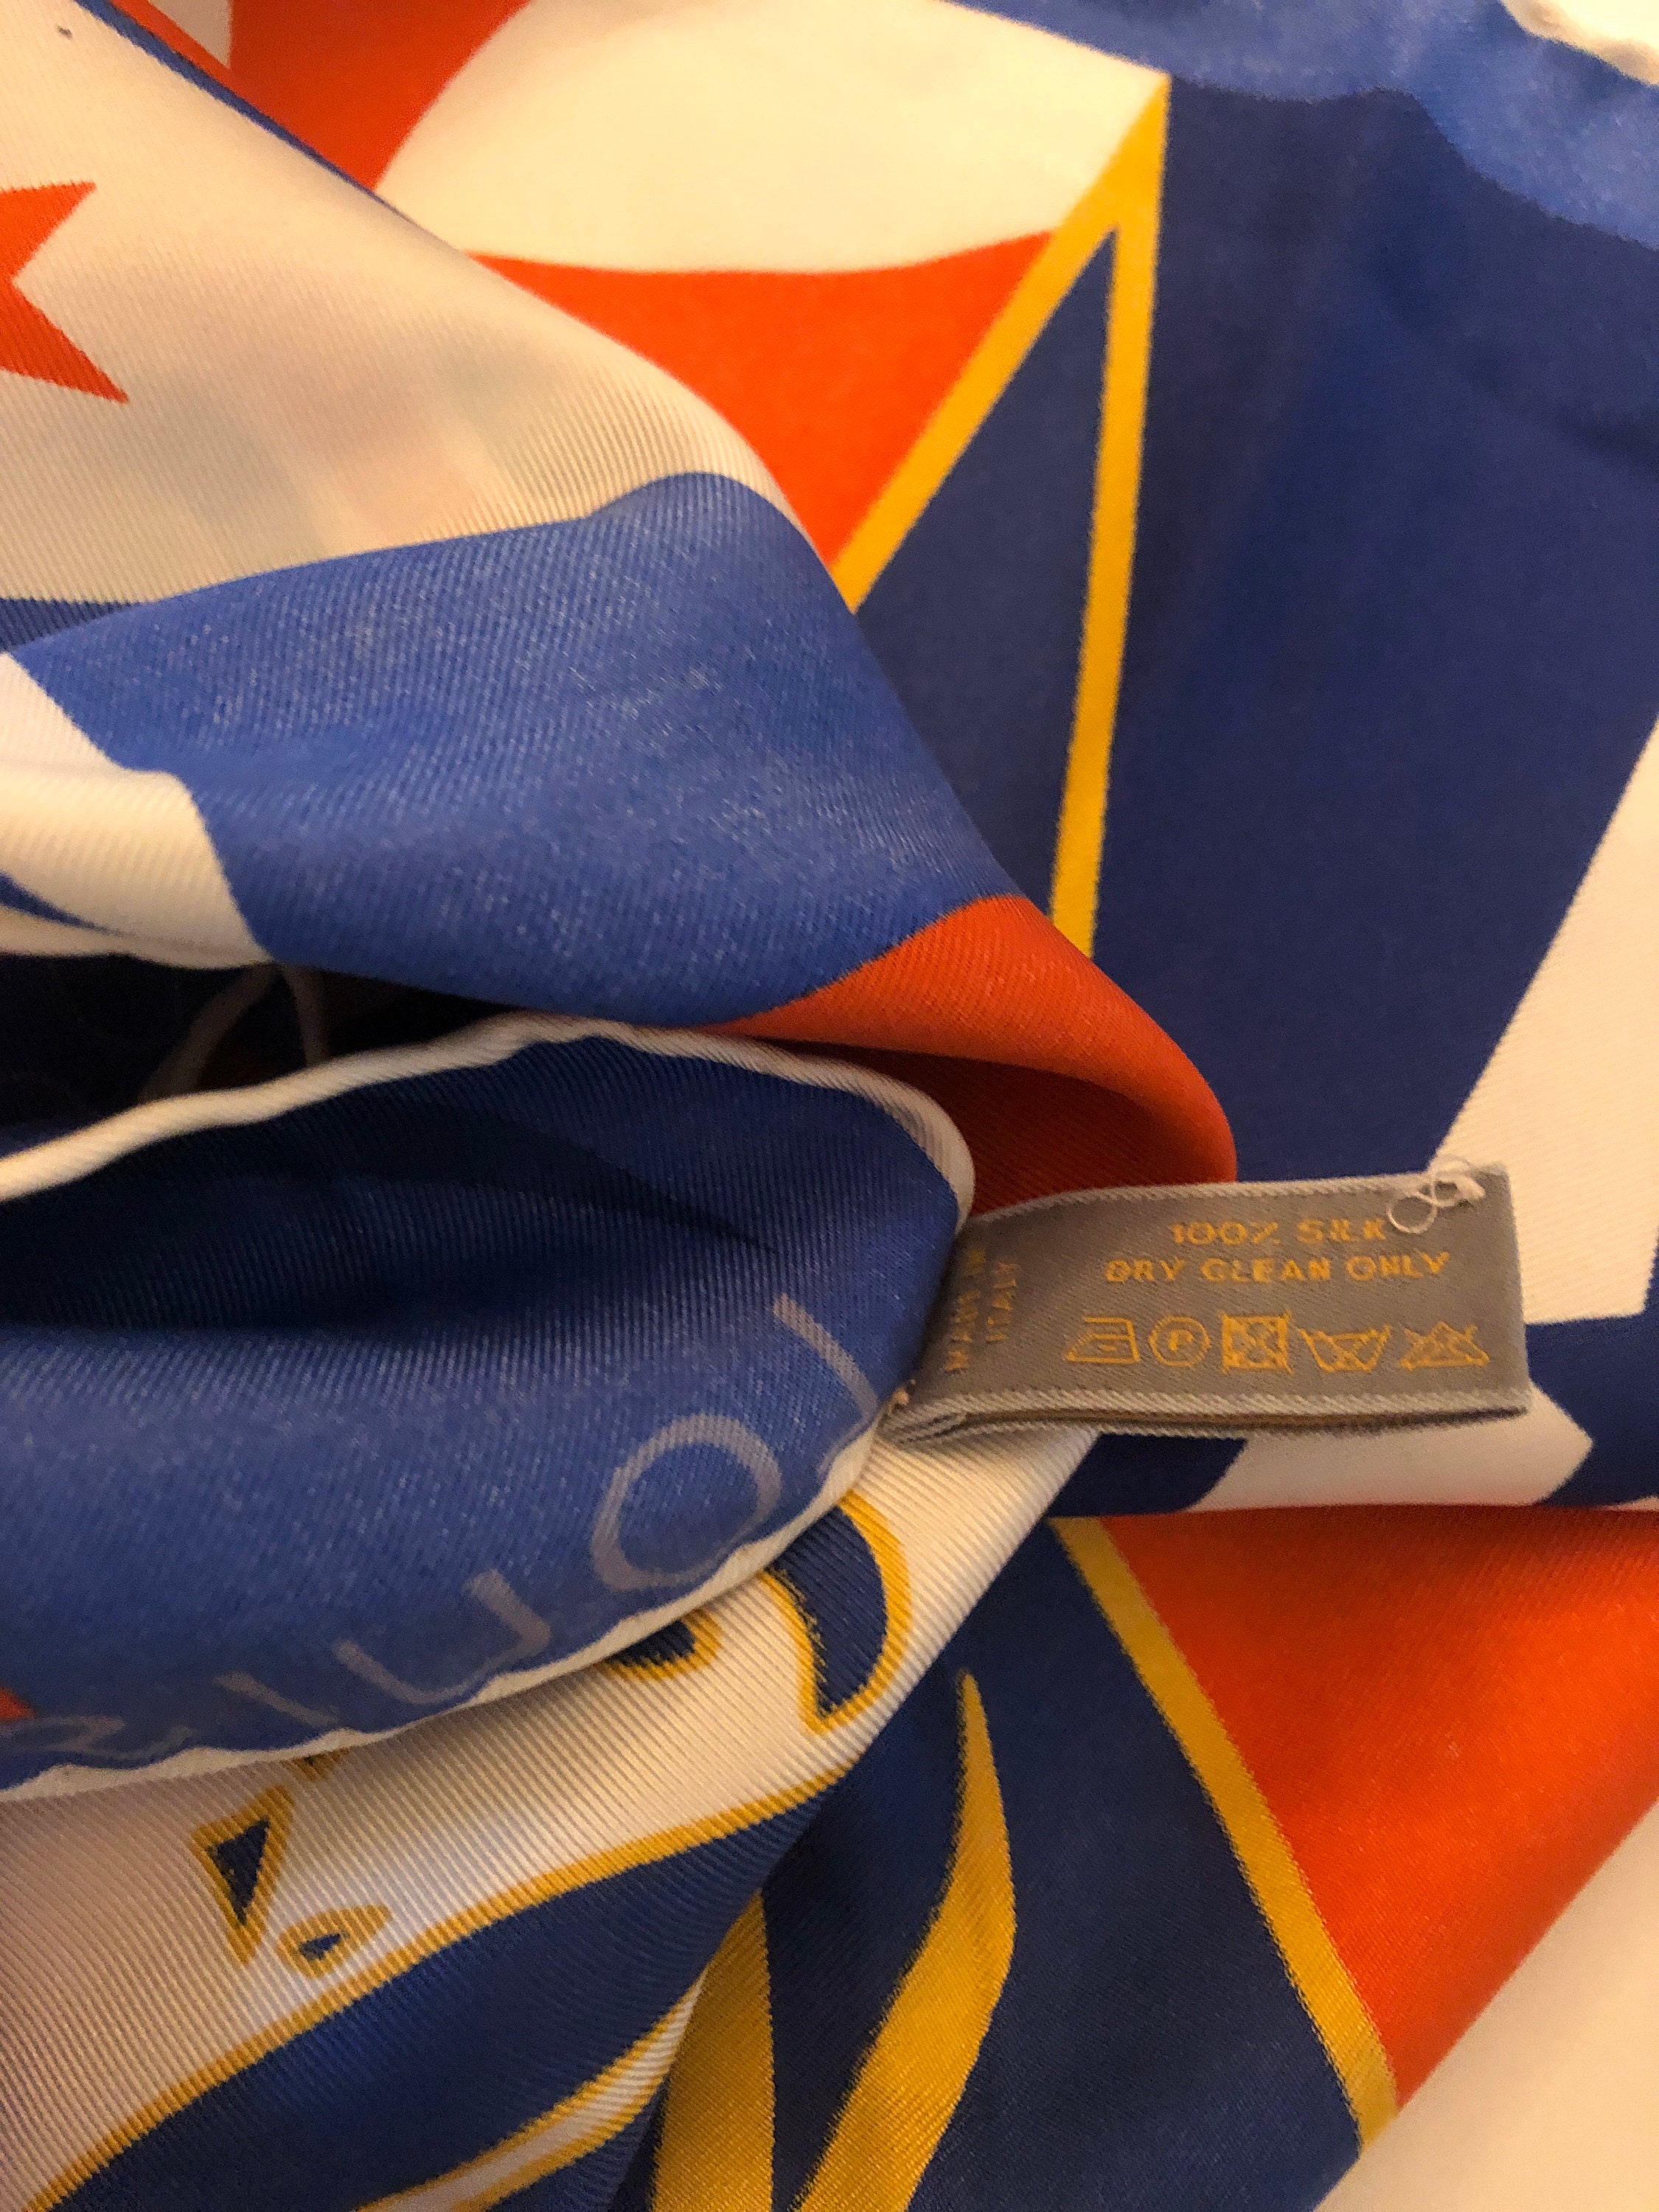 Rare Louis Vuitton Silk Scarf Limited Edition LV Cup 2000 -  Israel